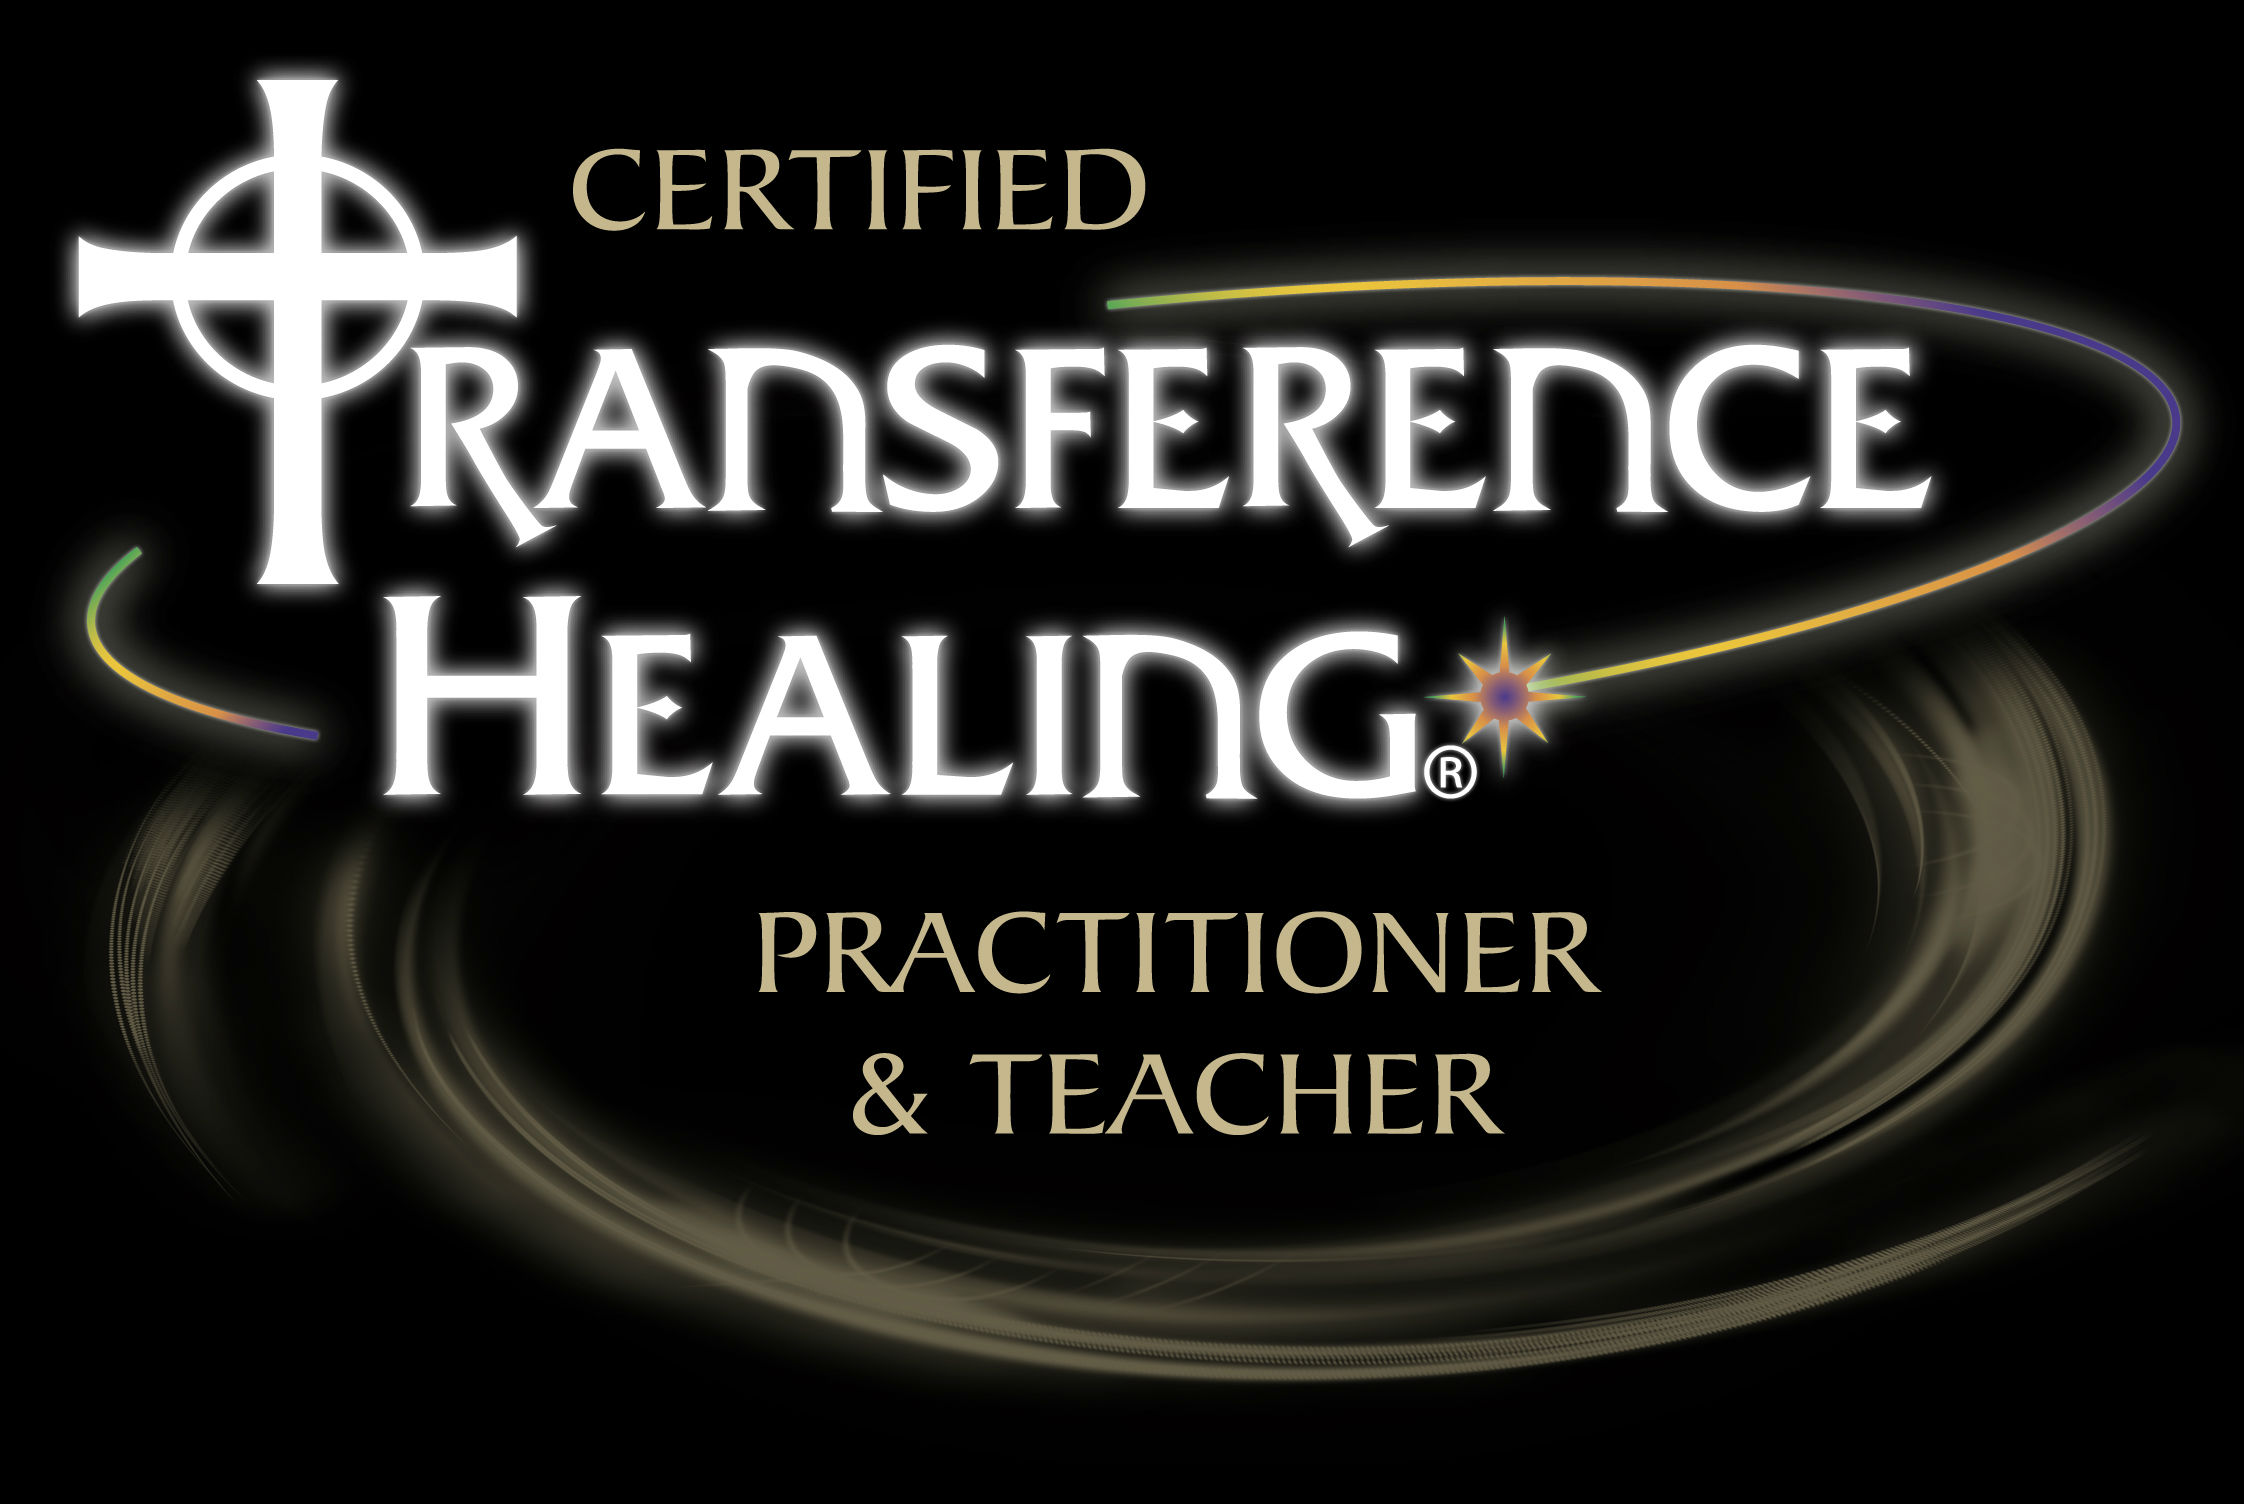 Transference Healing®